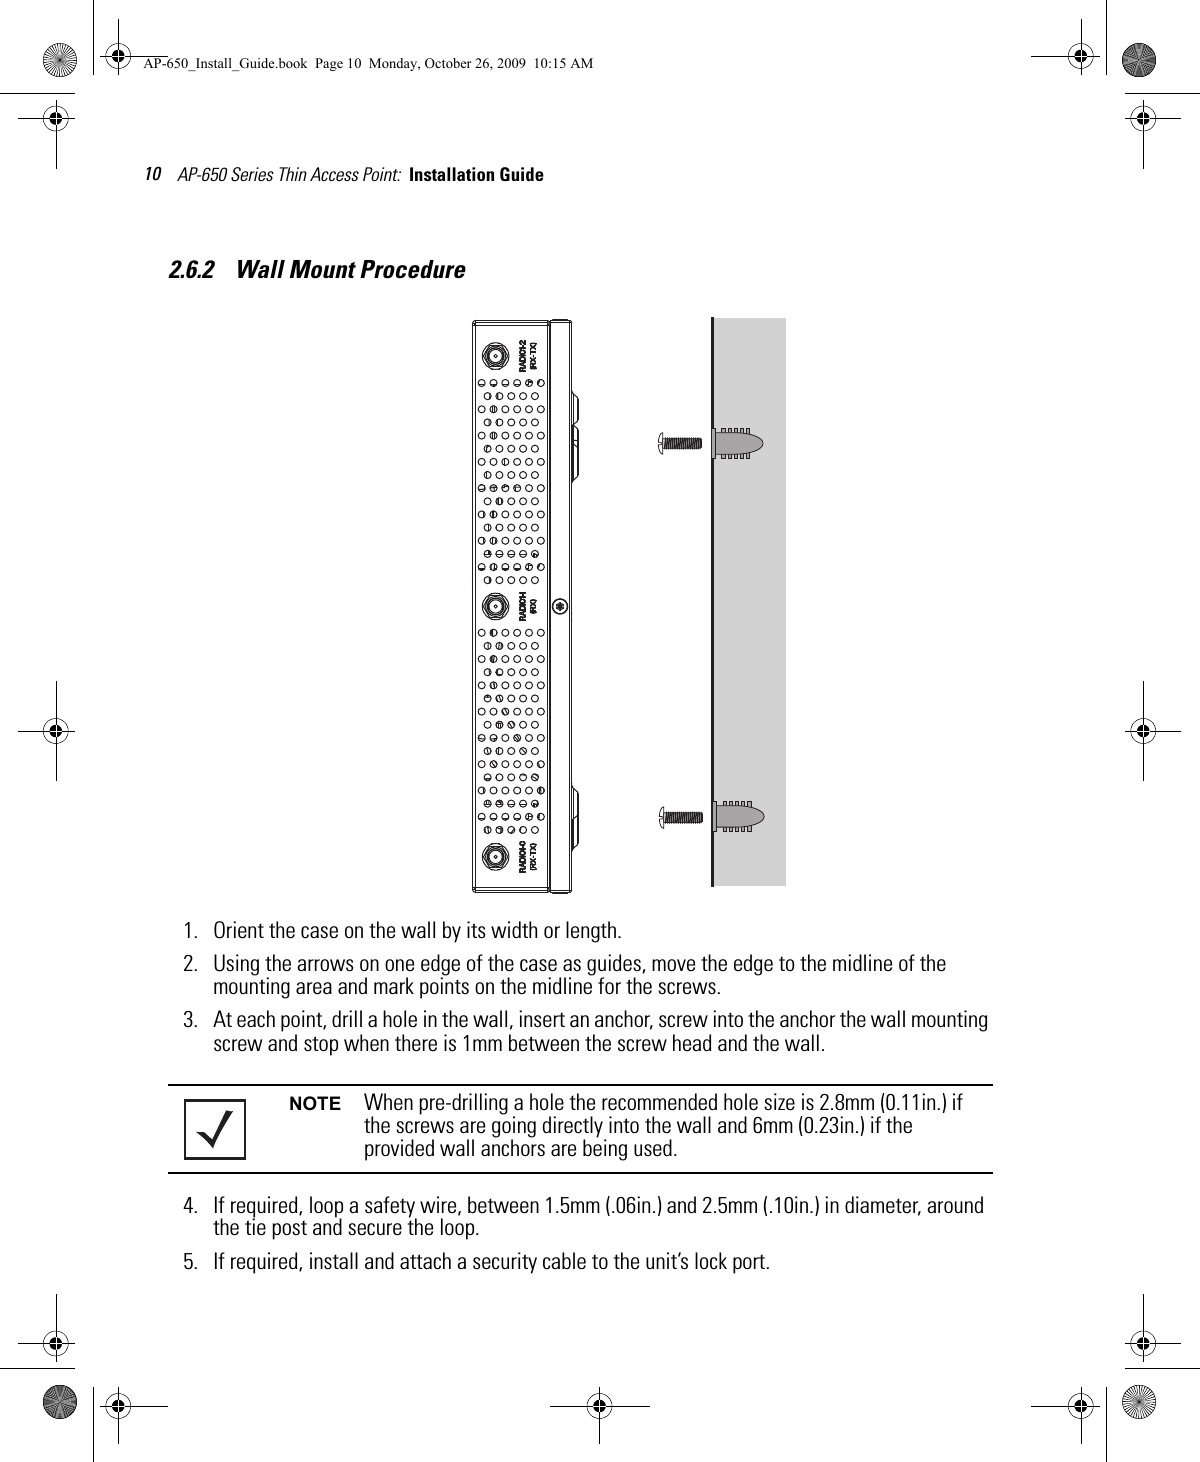 AP-650 Series Thin Access Point:  Installation Guide 102.6.2    Wall Mount Procedure1. Orient the case on the wall by its width or length.2. Using the arrows on one edge of the case as guides, move the edge to the midline of the mounting area and mark points on the midline for the screws.3. At each point, drill a hole in the wall, insert an anchor, screw into the anchor the wall mounting screw and stop when there is 1mm between the screw head and the wall.4. If required, loop a safety wire, between 1.5mm (.06in.) and 2.5mm (.10in.) in diameter, around the tie post and secure the loop.5. If required, install and attach a security cable to the unit’s lock port.NOTE When pre-drilling a hole the recommended hole size is 2.8mm (0.11in.) if the screws are going directly into the wall and 6mm (0.23in.) if the provided wall anchors are being used.AP-650_Install_Guide.book  Page 10  Monday, October 26, 2009  10:15 AM